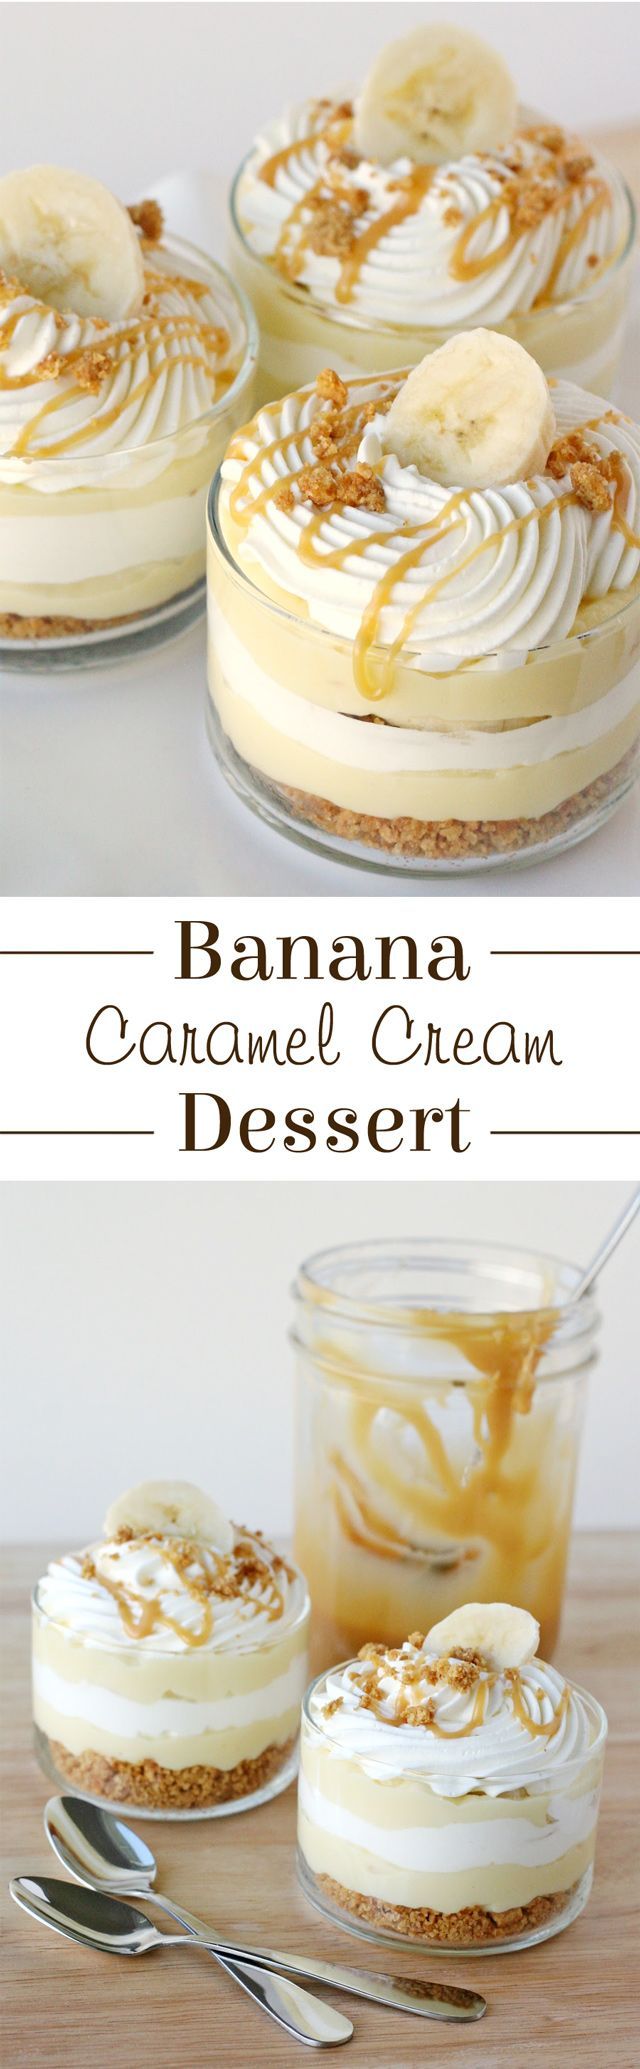 This Banana Caramel Cream Dessert is simply one of the most delicious desserts ever! Sweet, creamy, crunchy... this dessert has it